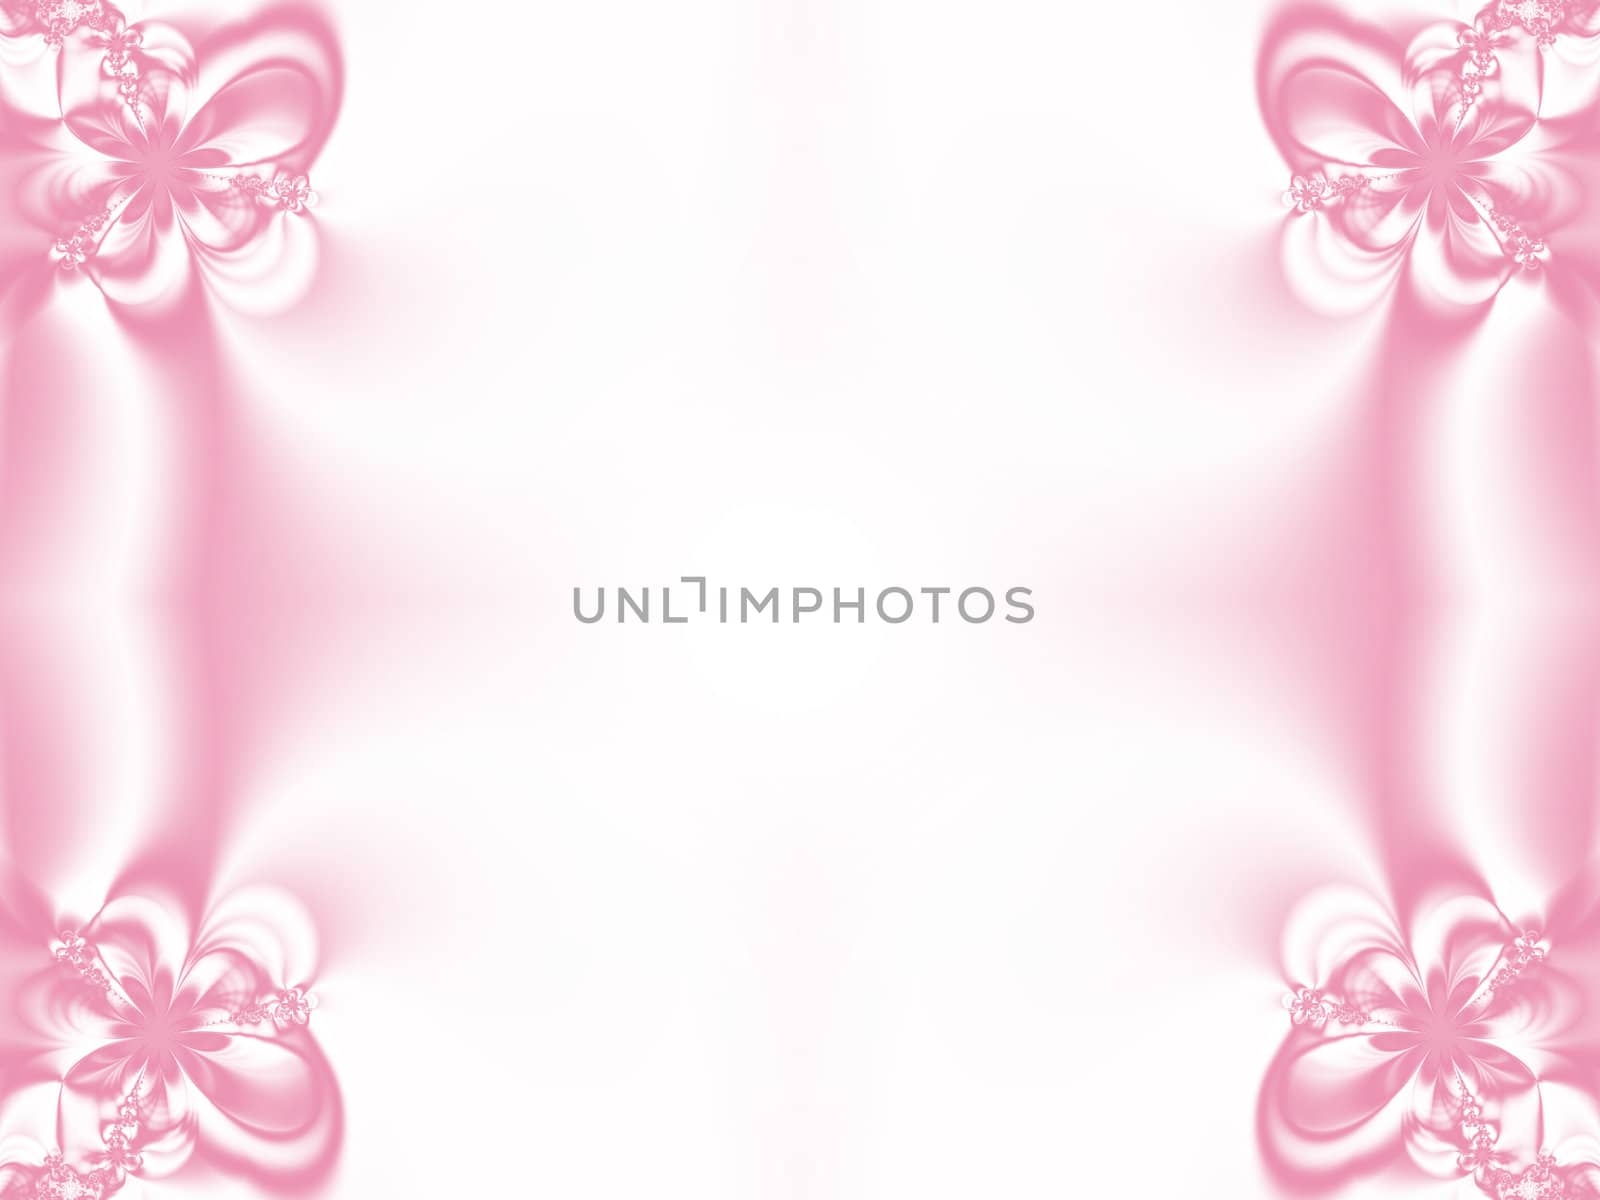 smooth rose-colored fractal frame suitable for all kind of invitations, announcements, centered copy-space